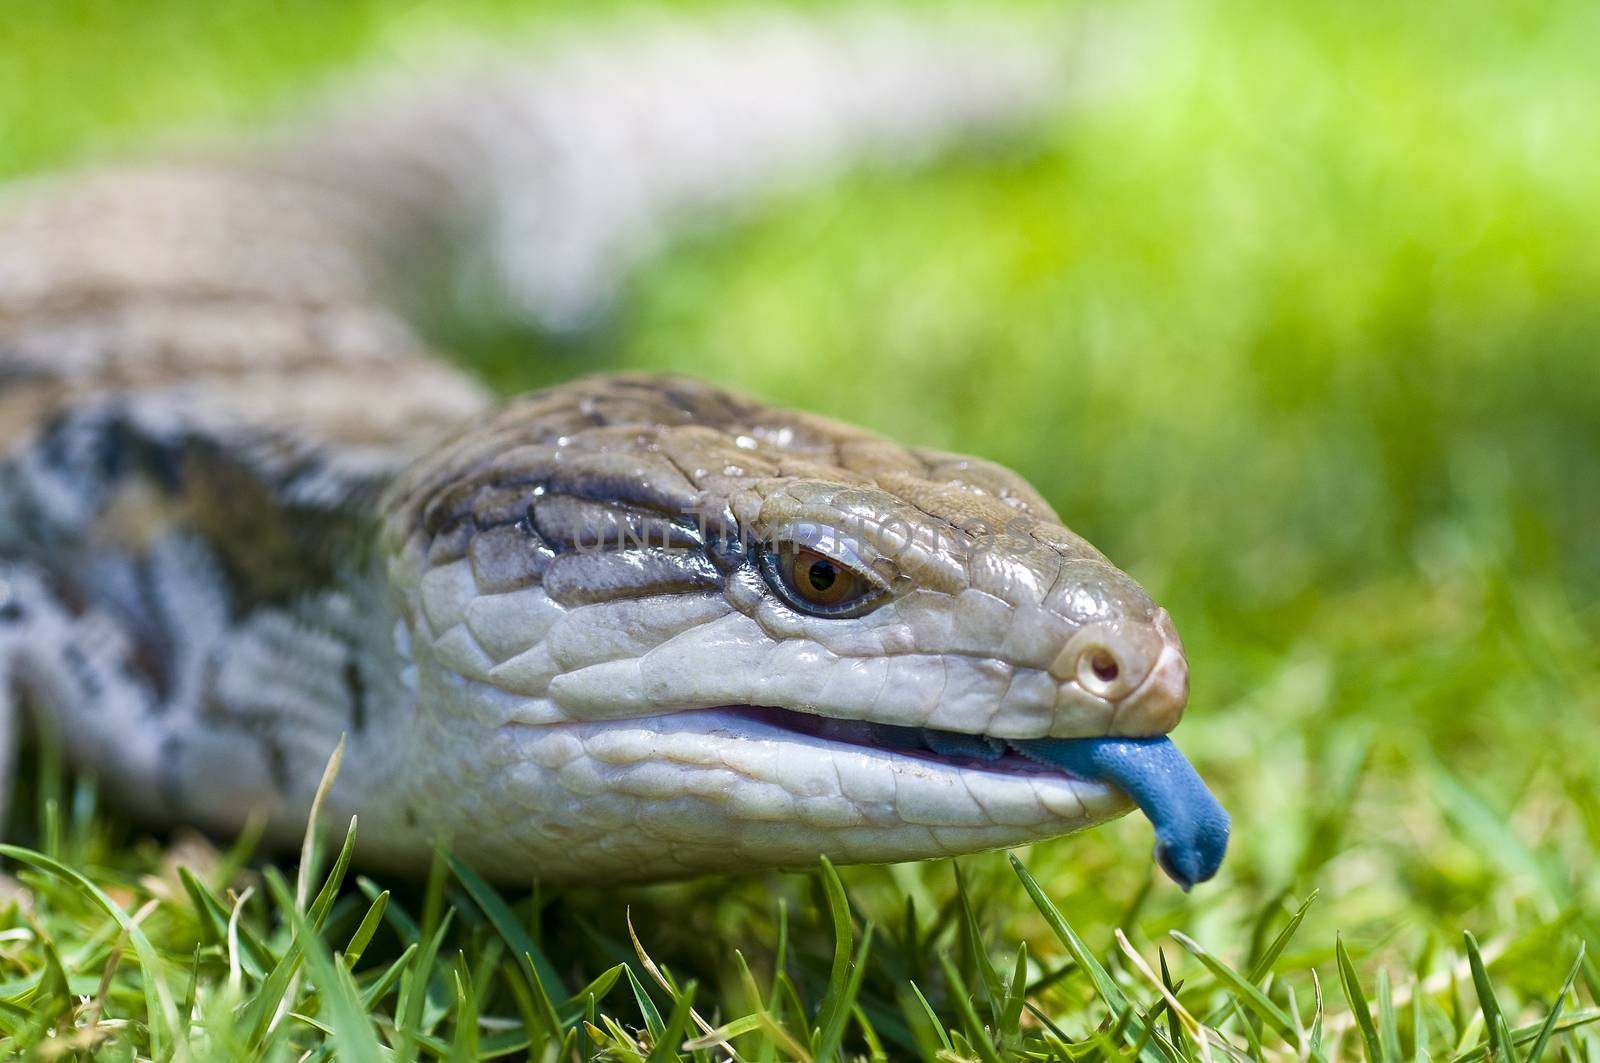 Blue-tongued skink or Blue-tongued Lizard by Njean